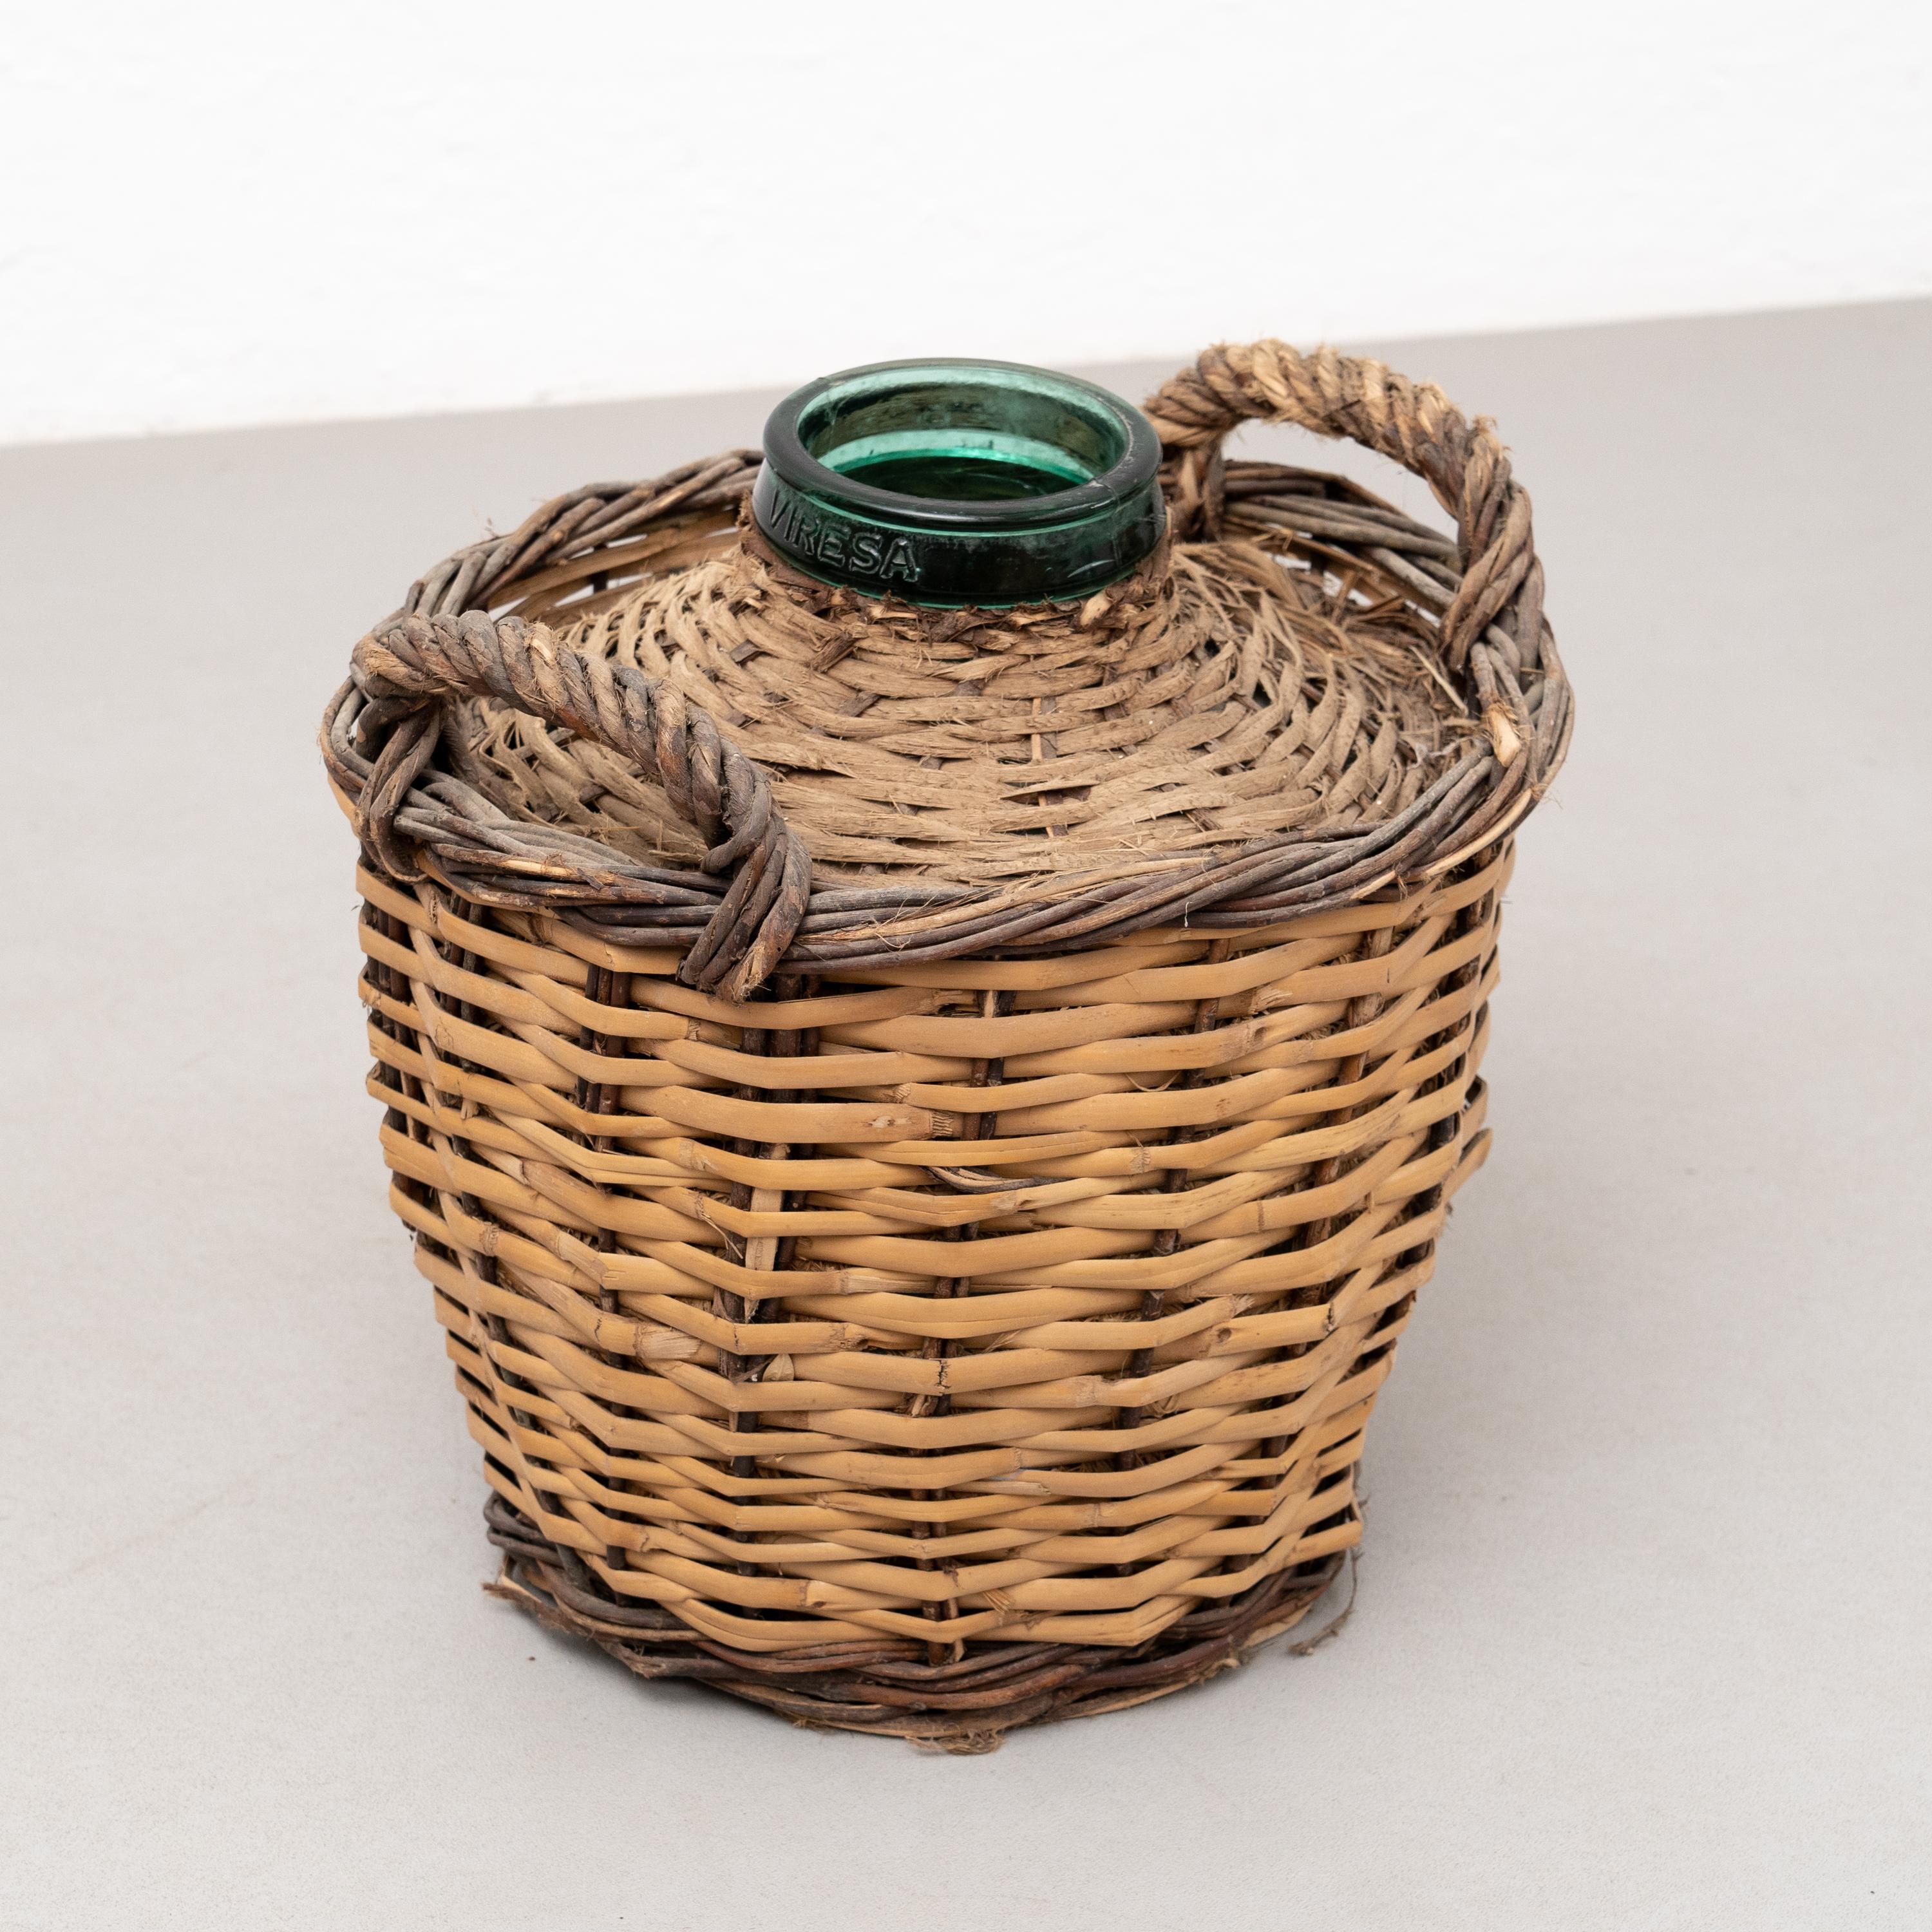 Antique Vase with Wicker Basket, circa 1960 For Sale 1